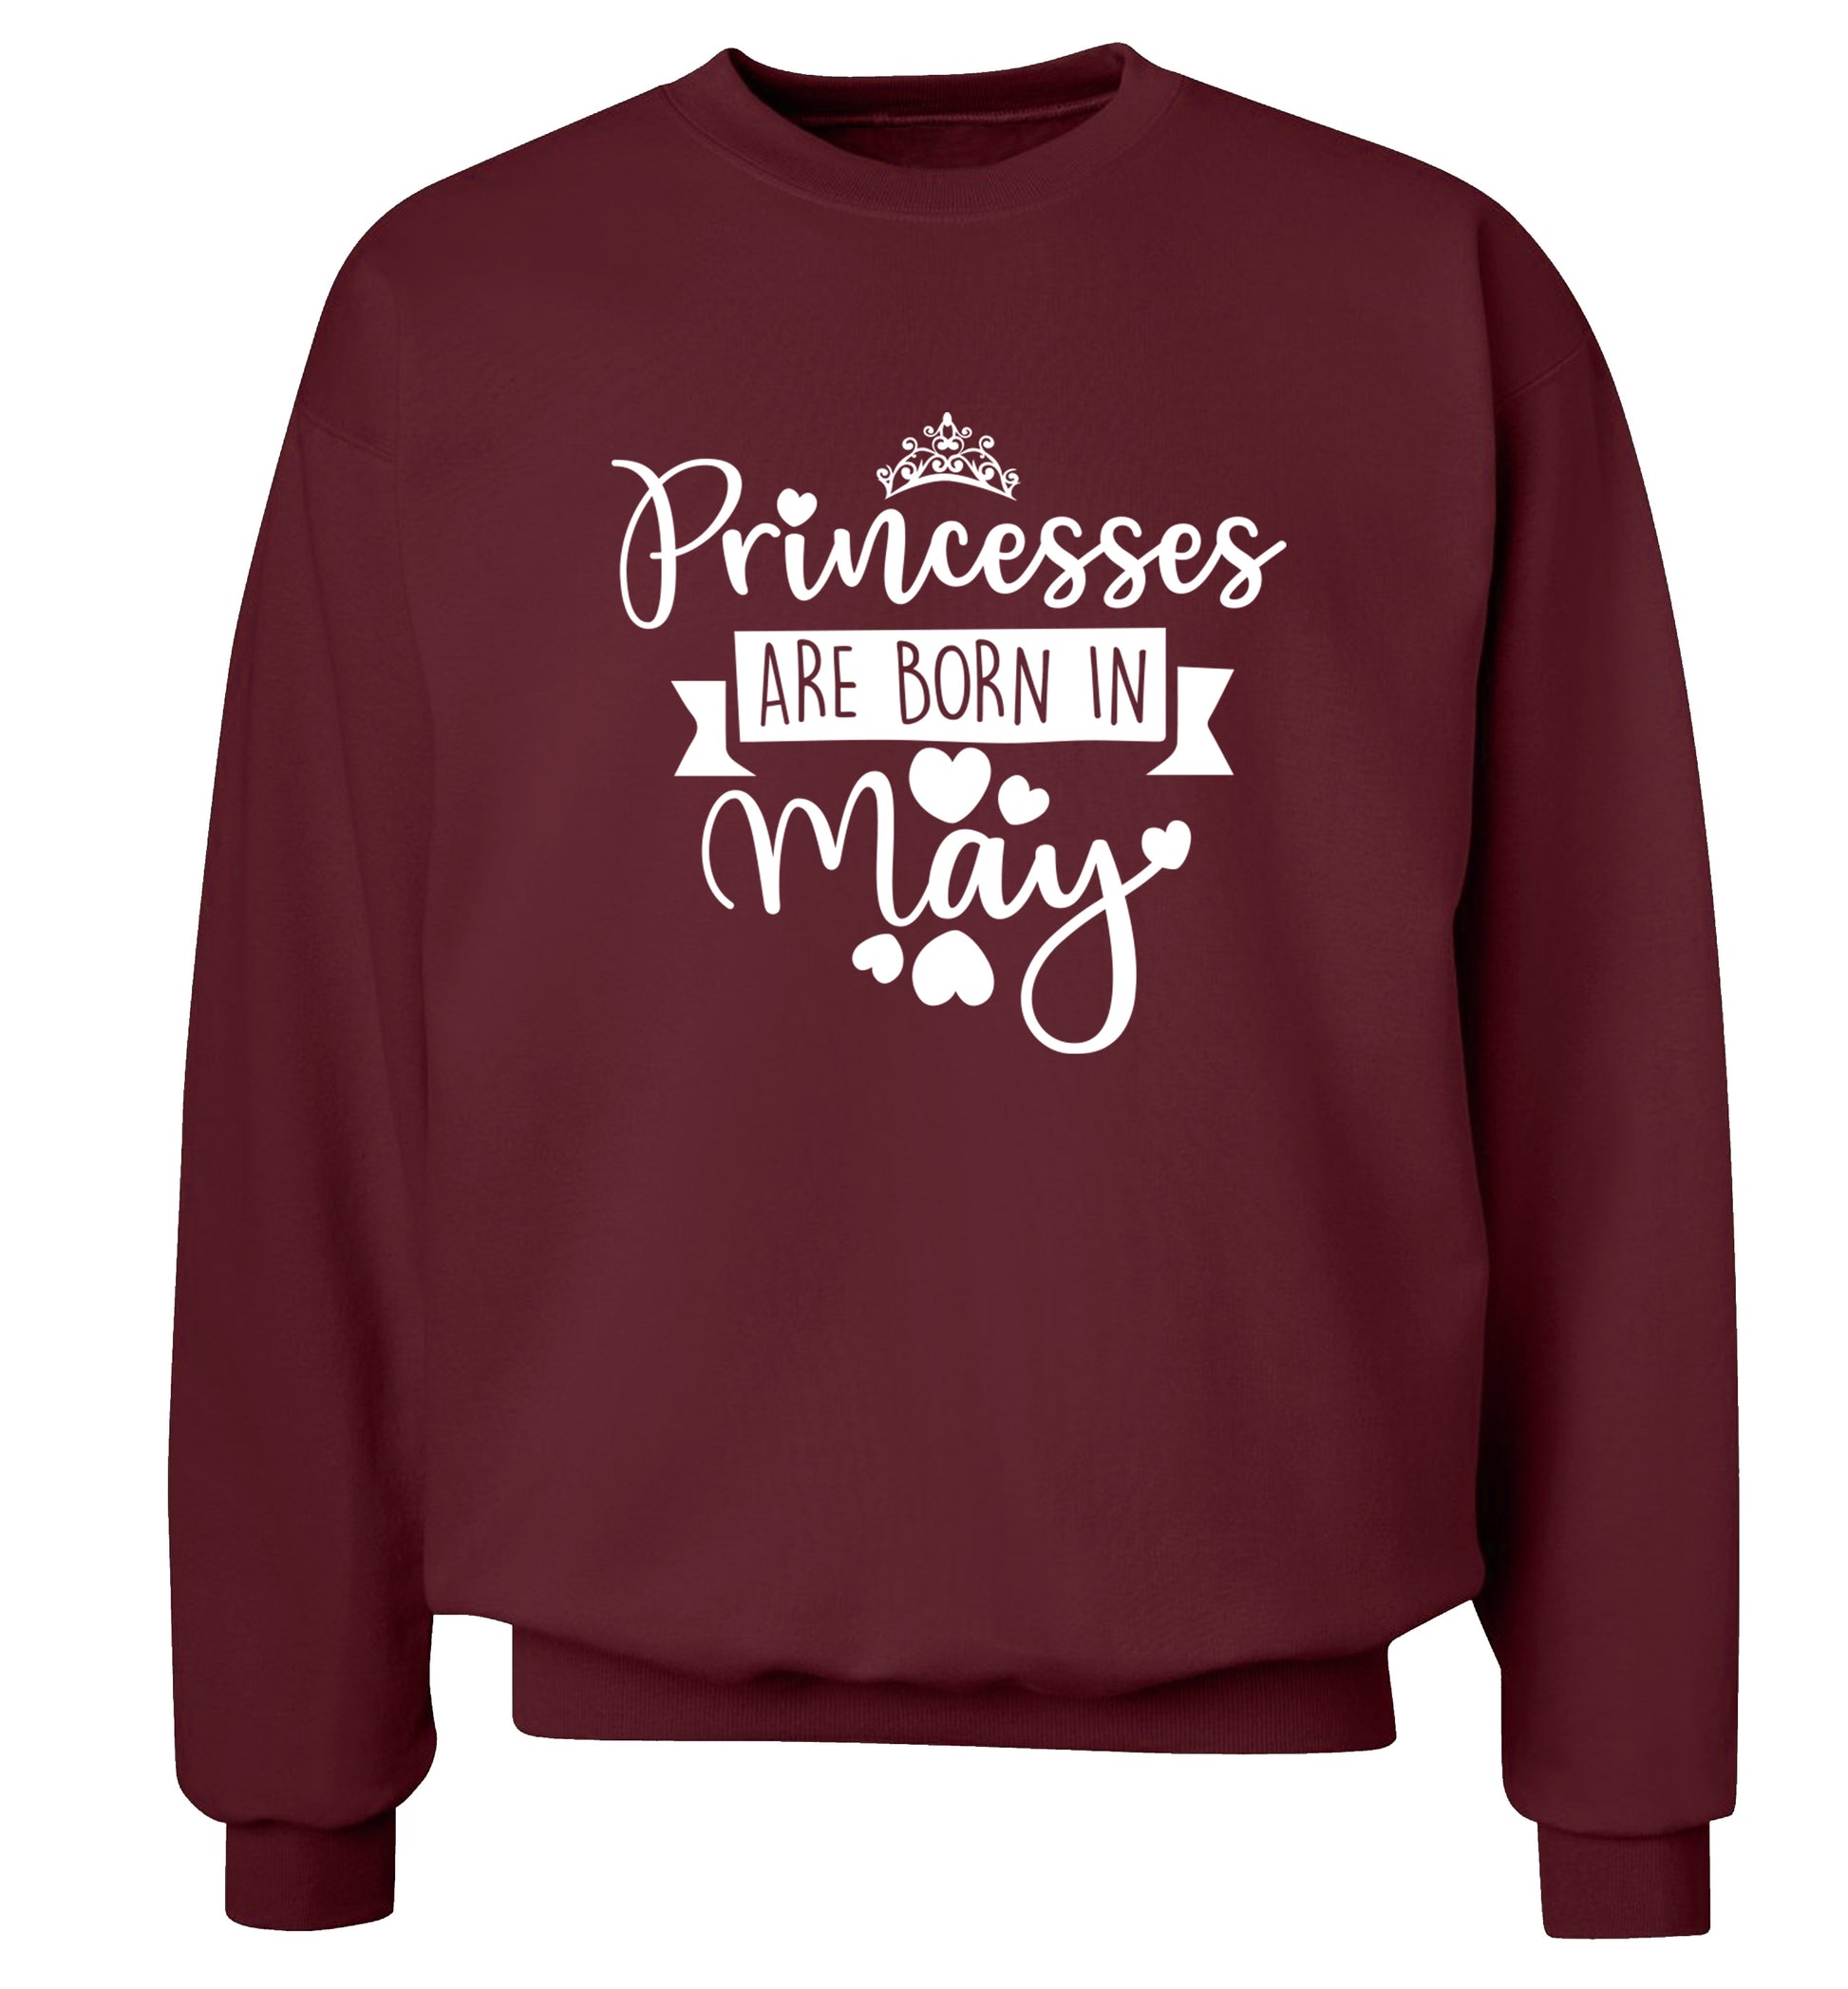 Princesses are born in May Adult's unisex maroon Sweater 2XL